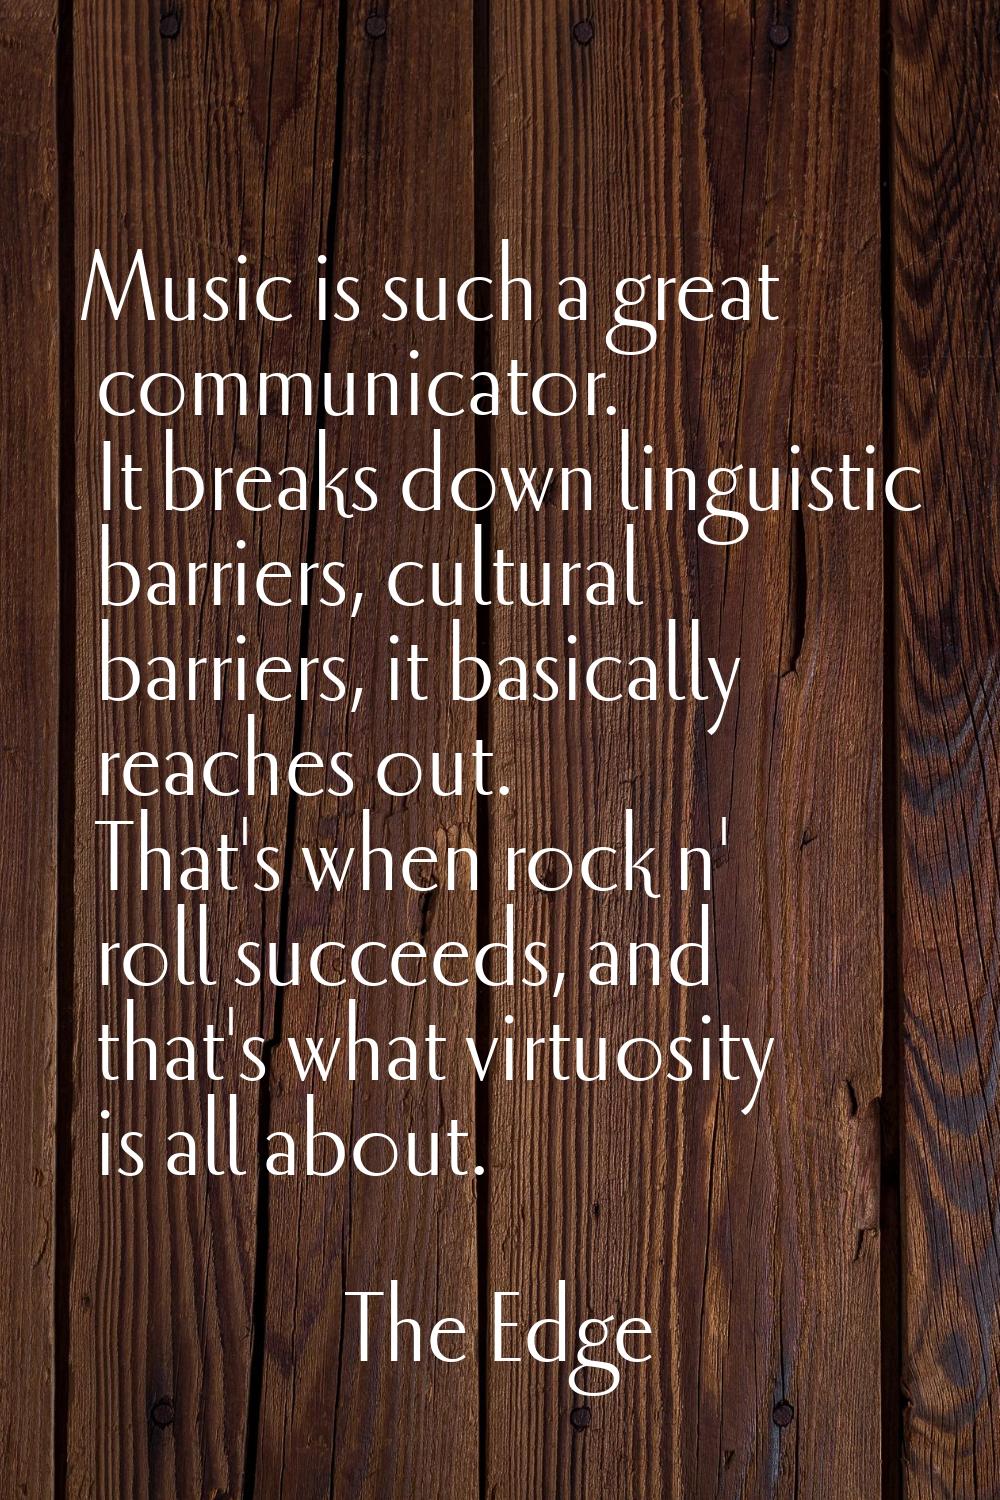 Music is such a great communicator. It breaks down linguistic barriers, cultural barriers, it basic